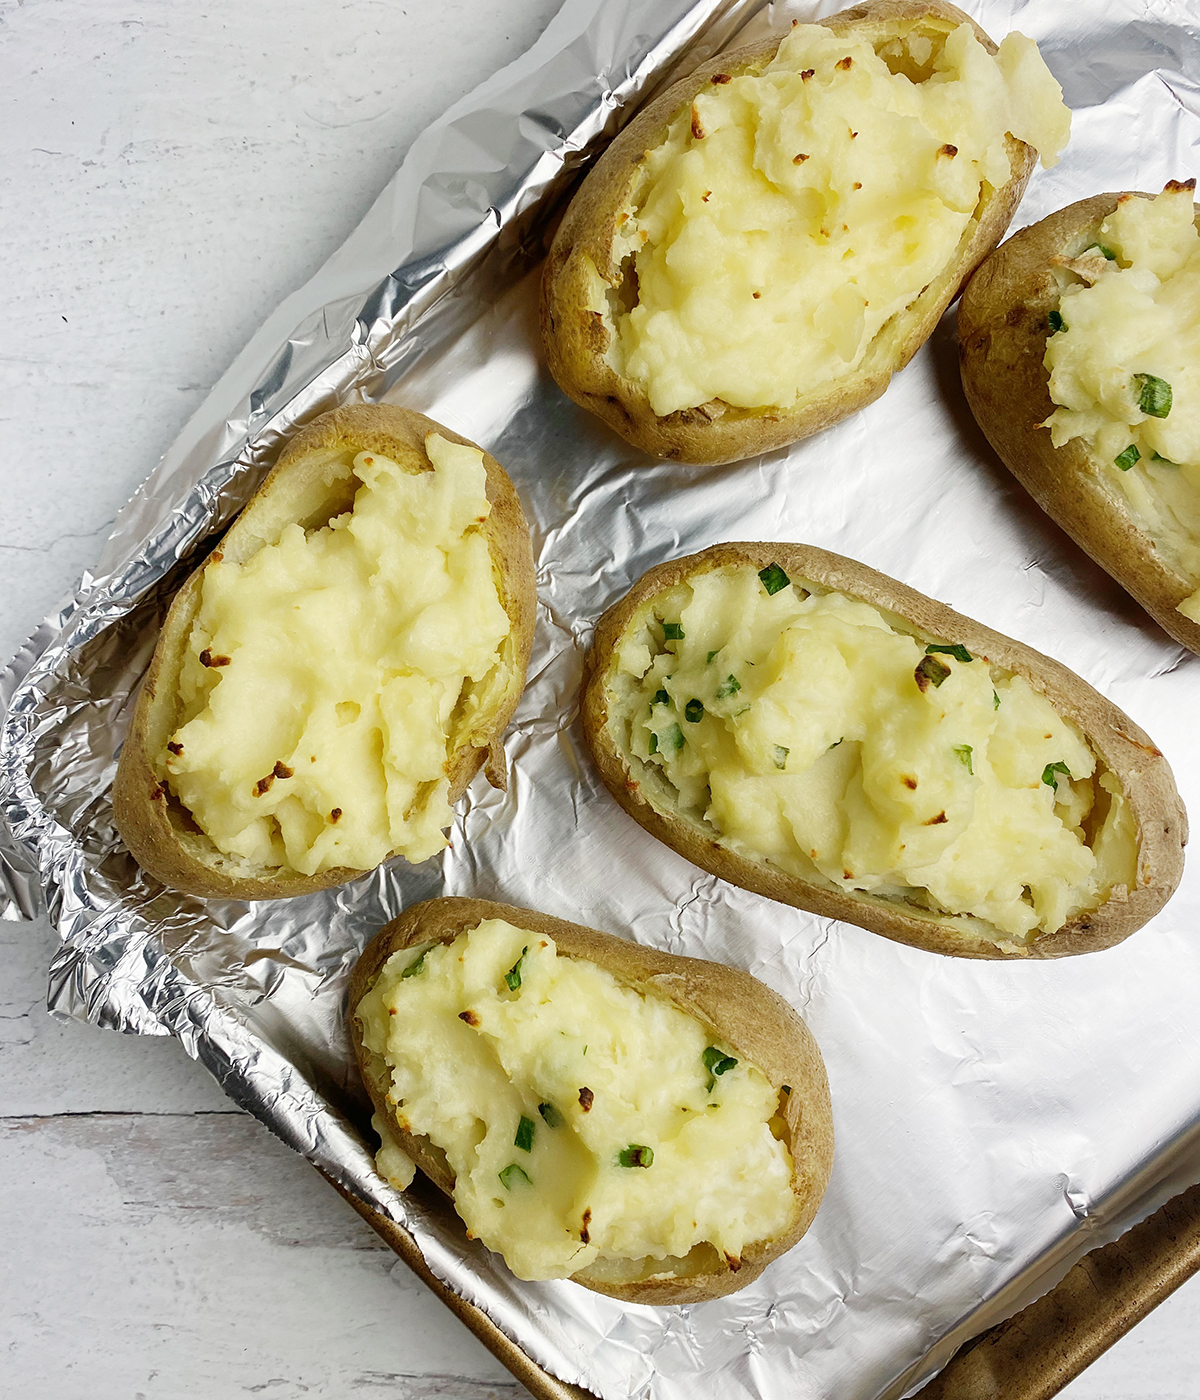 Baked and stuffed potatoes on a baking tray.